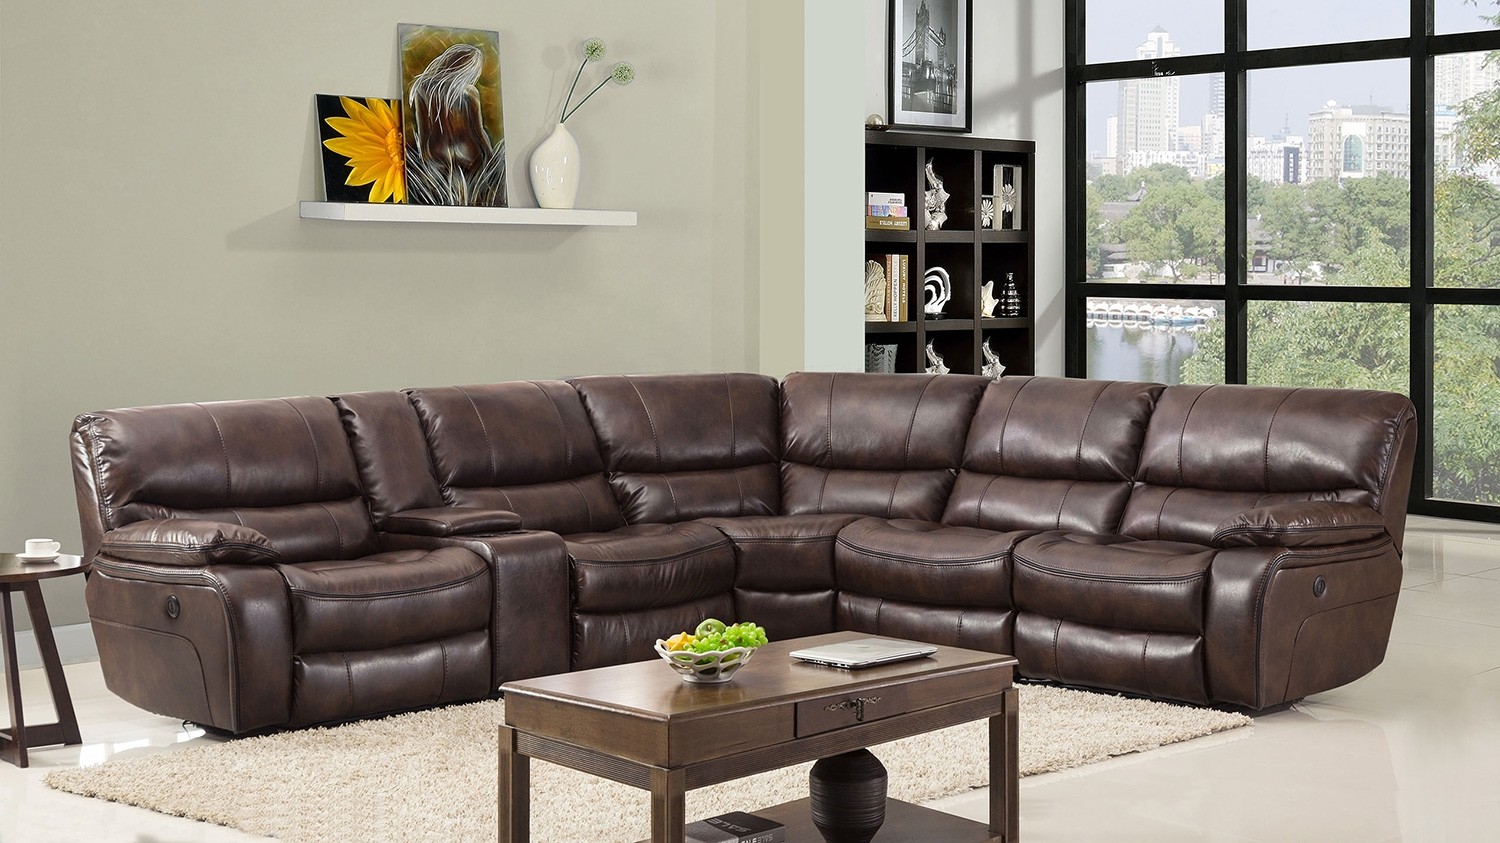 254'' X 41'' X 40'' Modern Dark Brown Leather Sectional